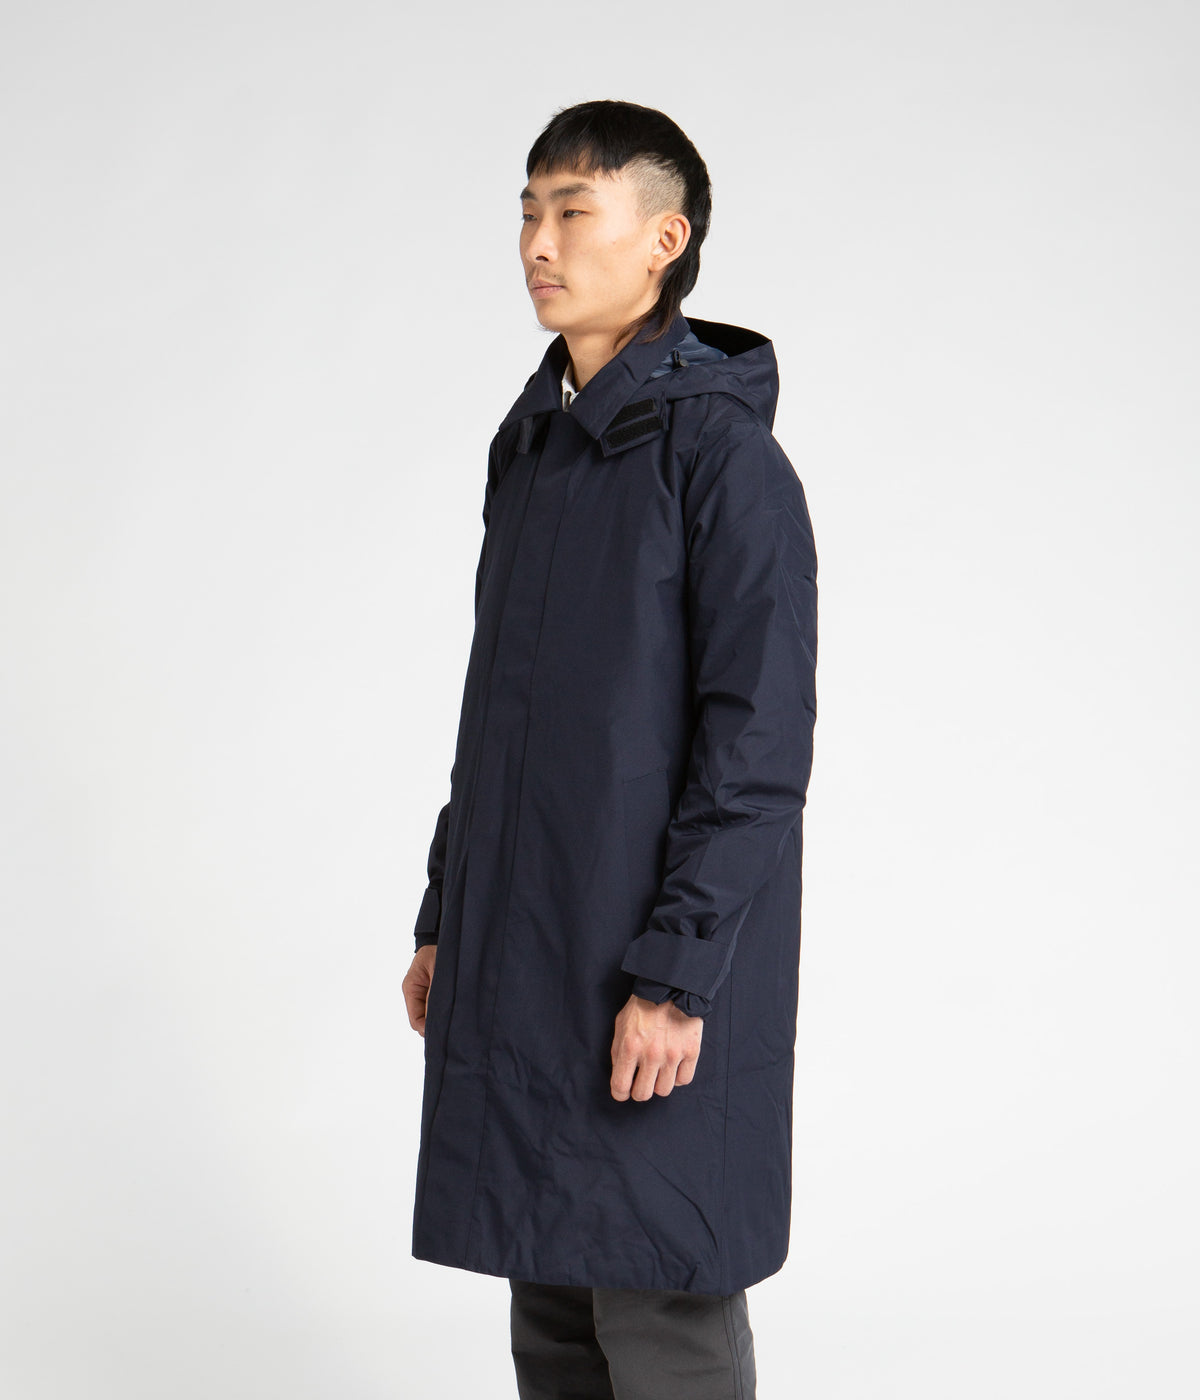 Gore-Tex Jacket Thor Navy Projects Norse Dark 2.0 Infinium in Always - Colour |